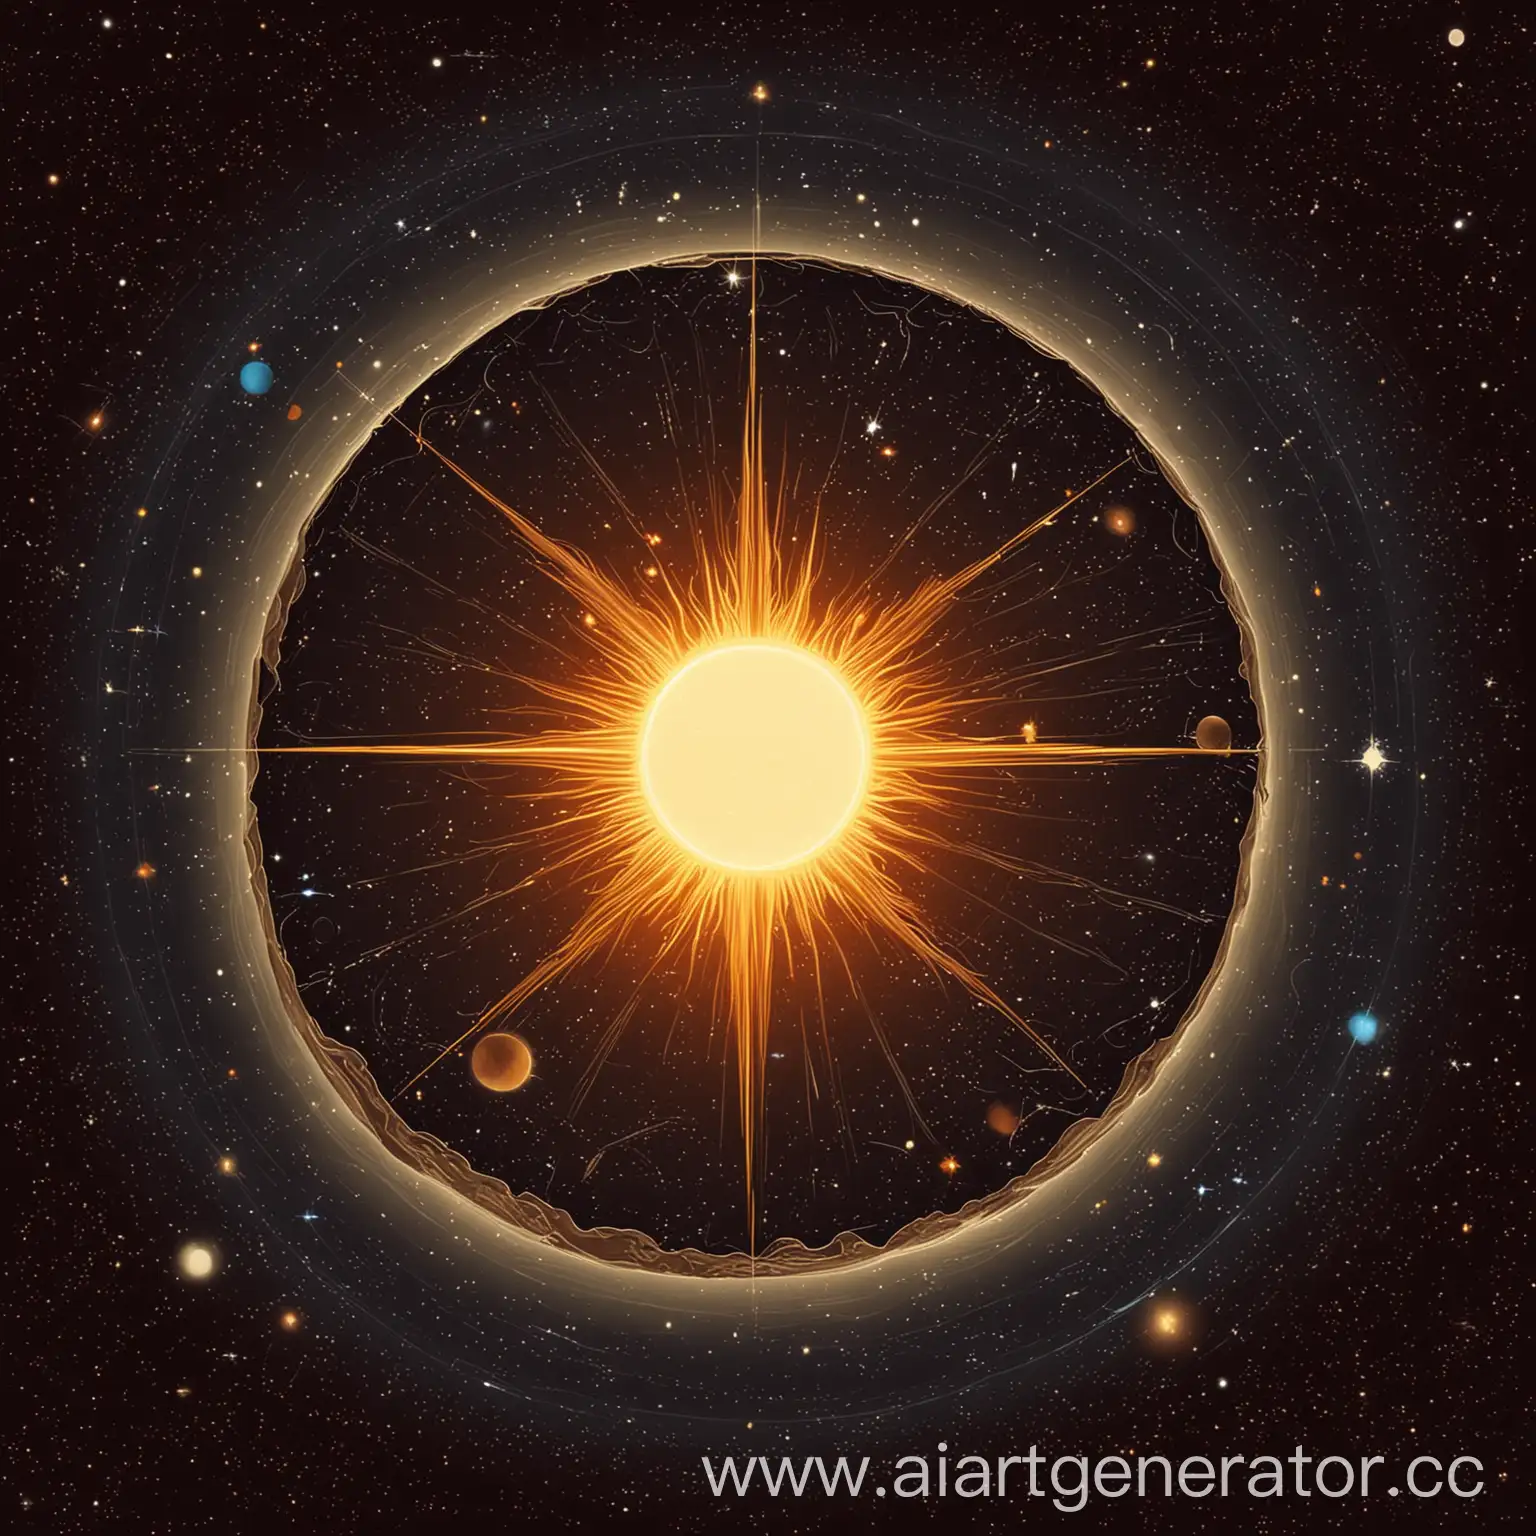 Illustration-of-Astronomy-Educational-Exploration-of-the-Sun